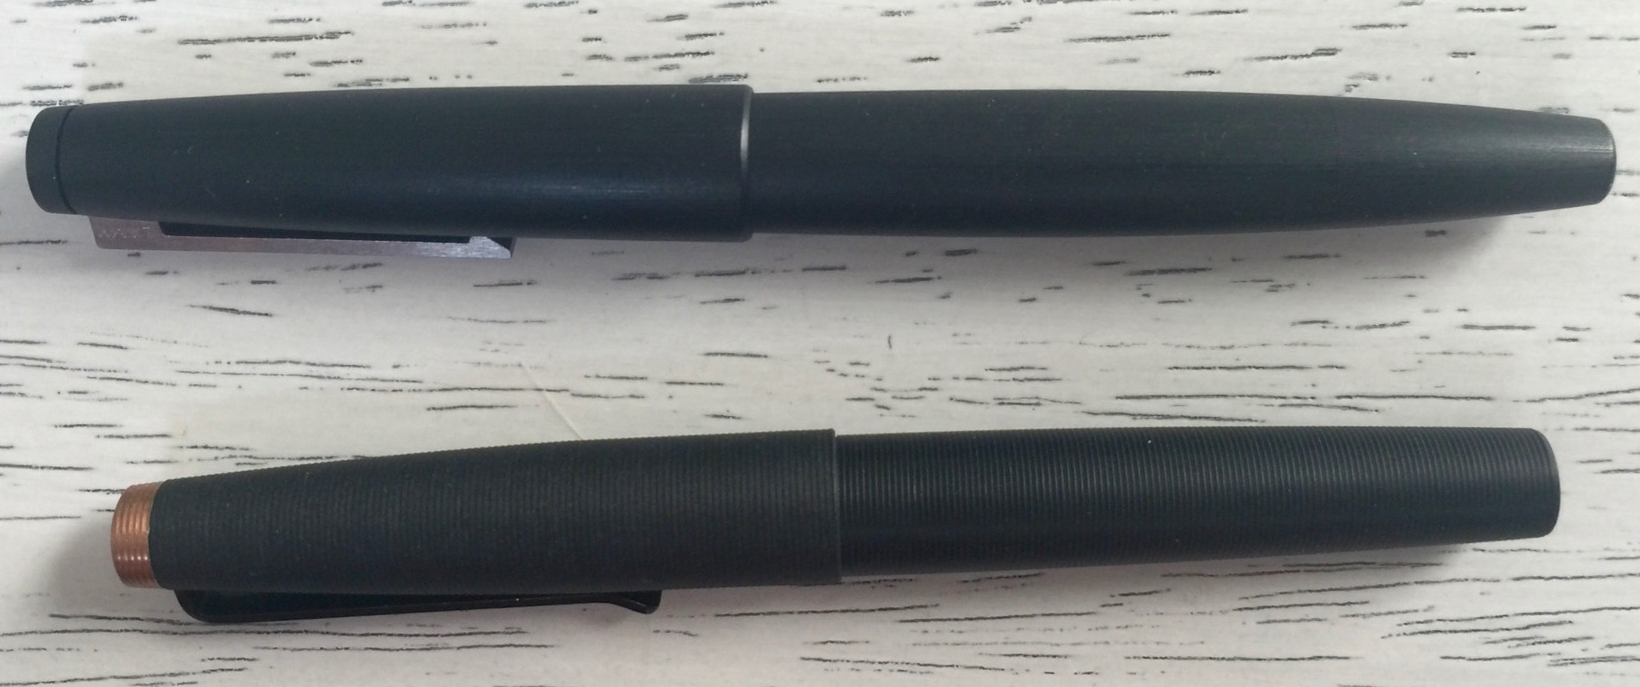 Tactile Turn Gist Fountain Pen Review Lamy 2000 Comparison Capped.jpg